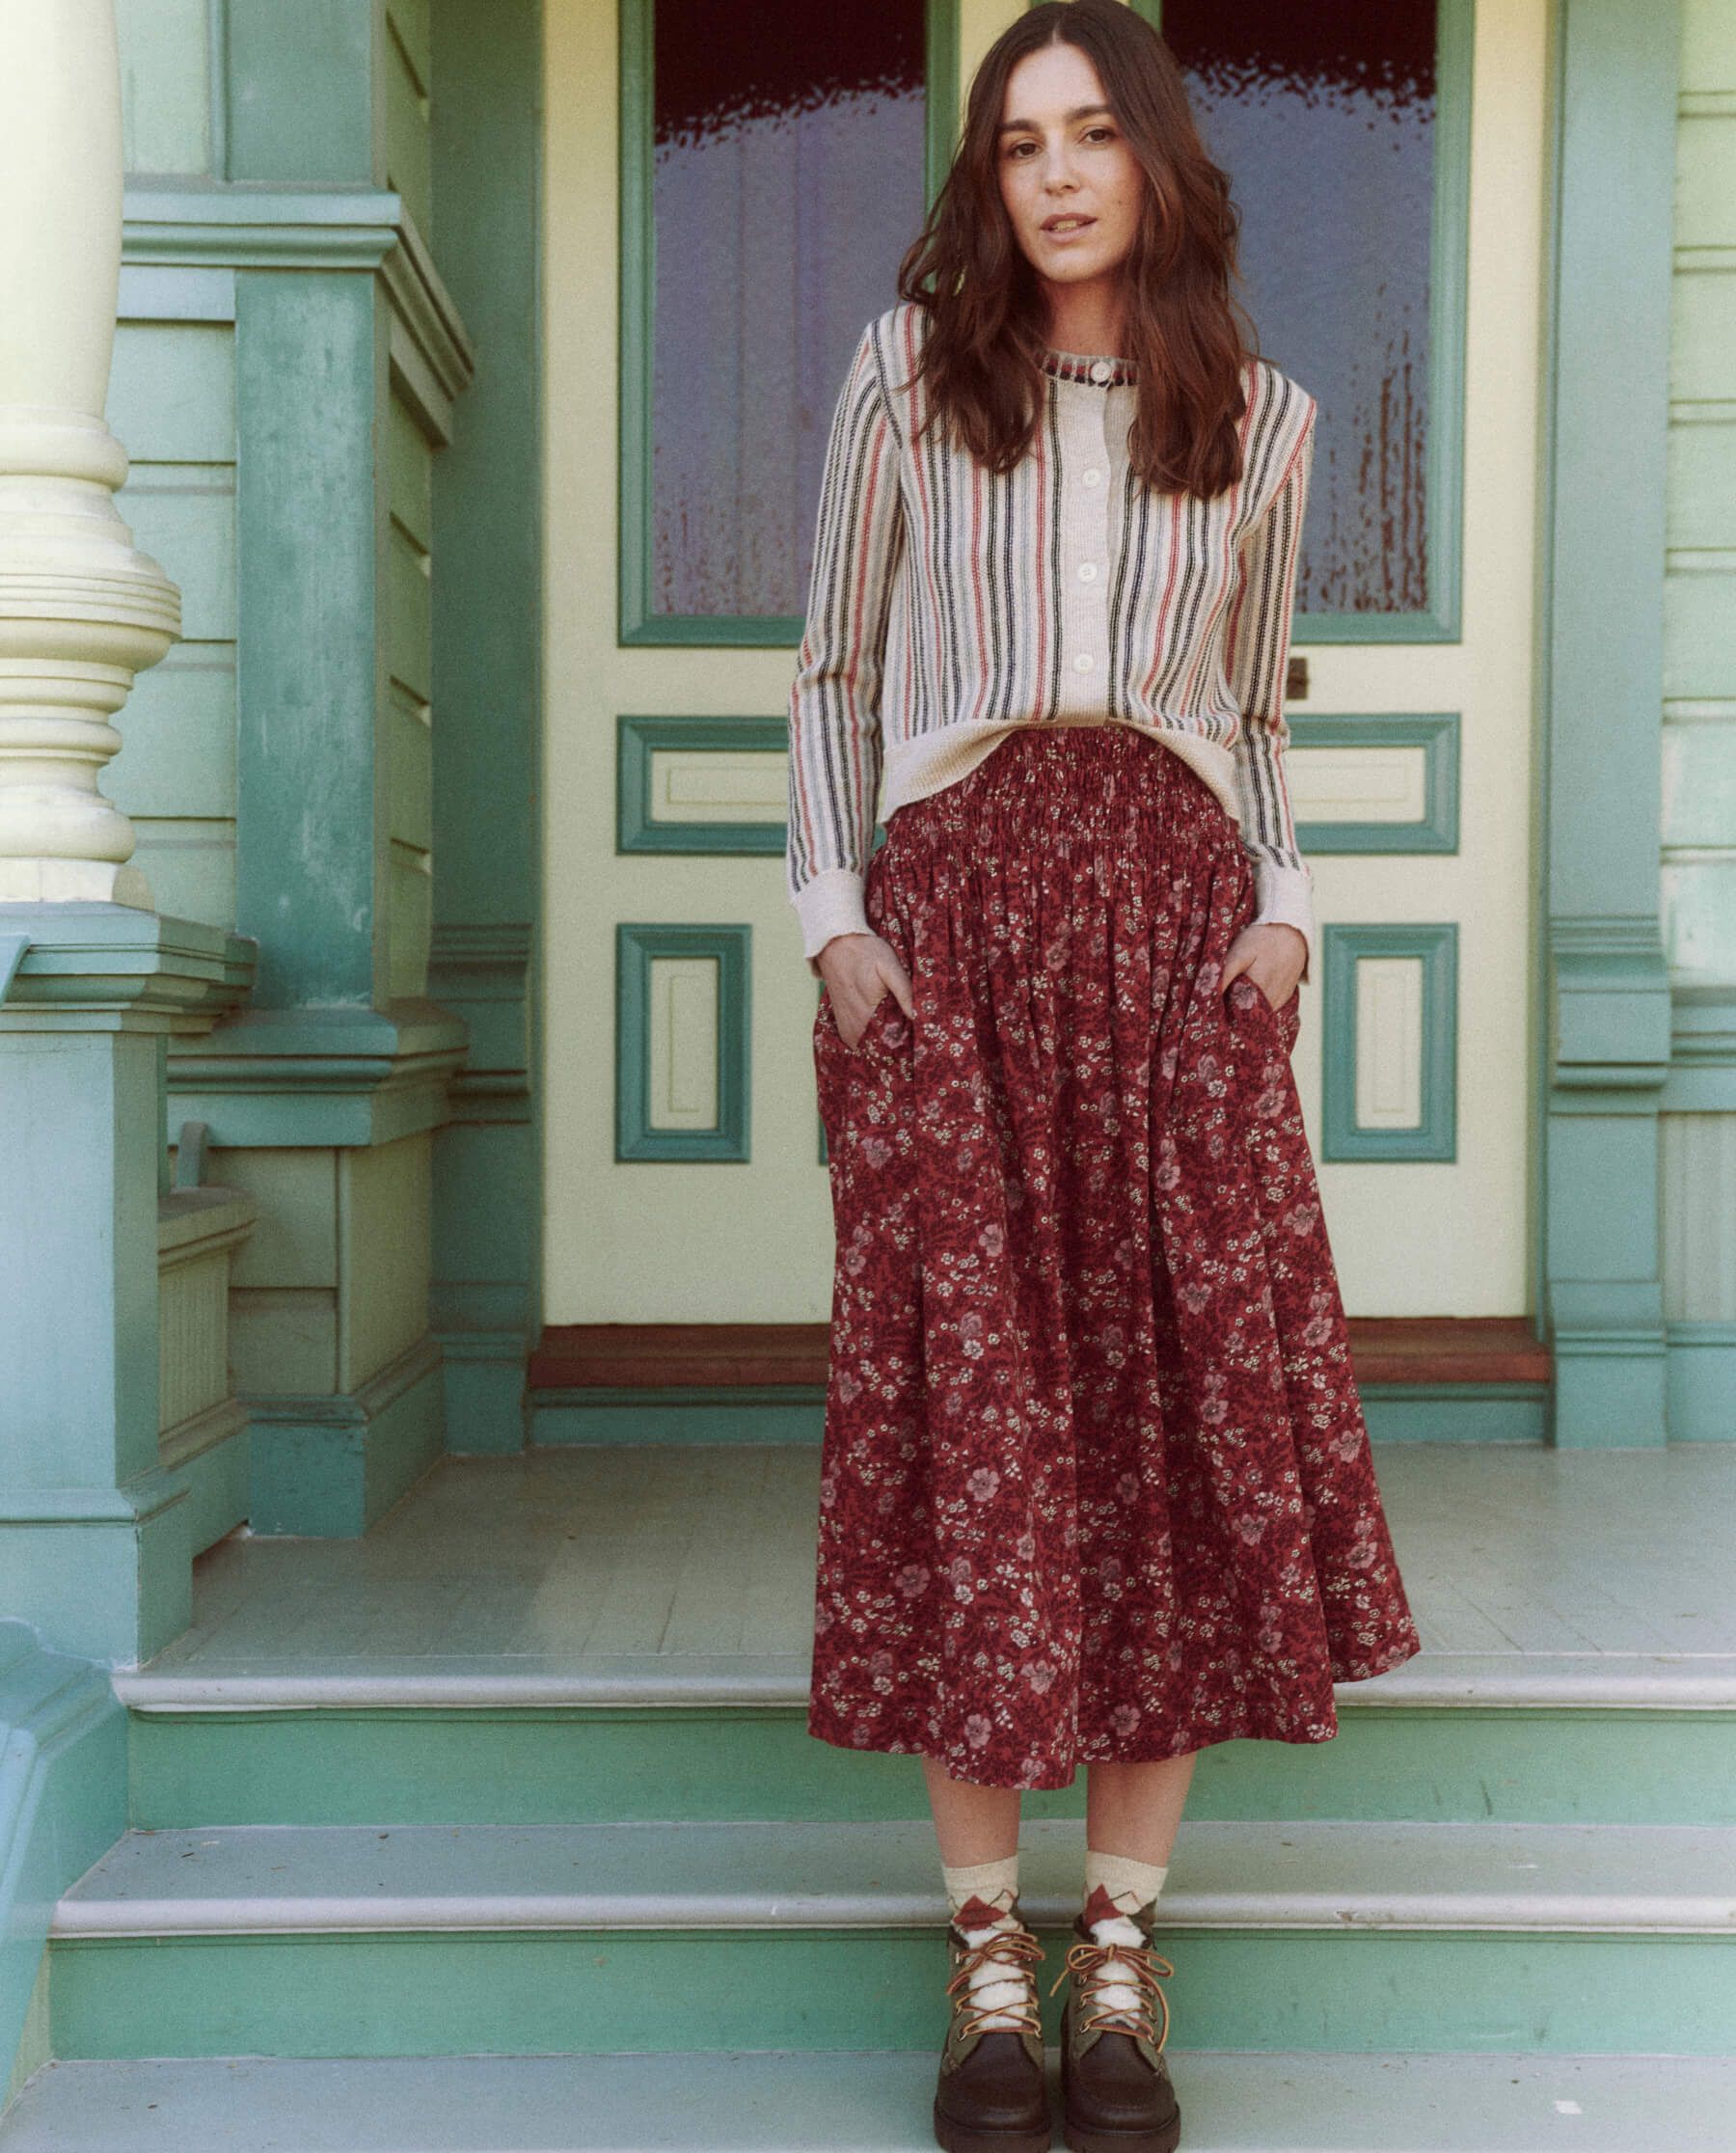 The Viola Skirt. | THE GREAT.